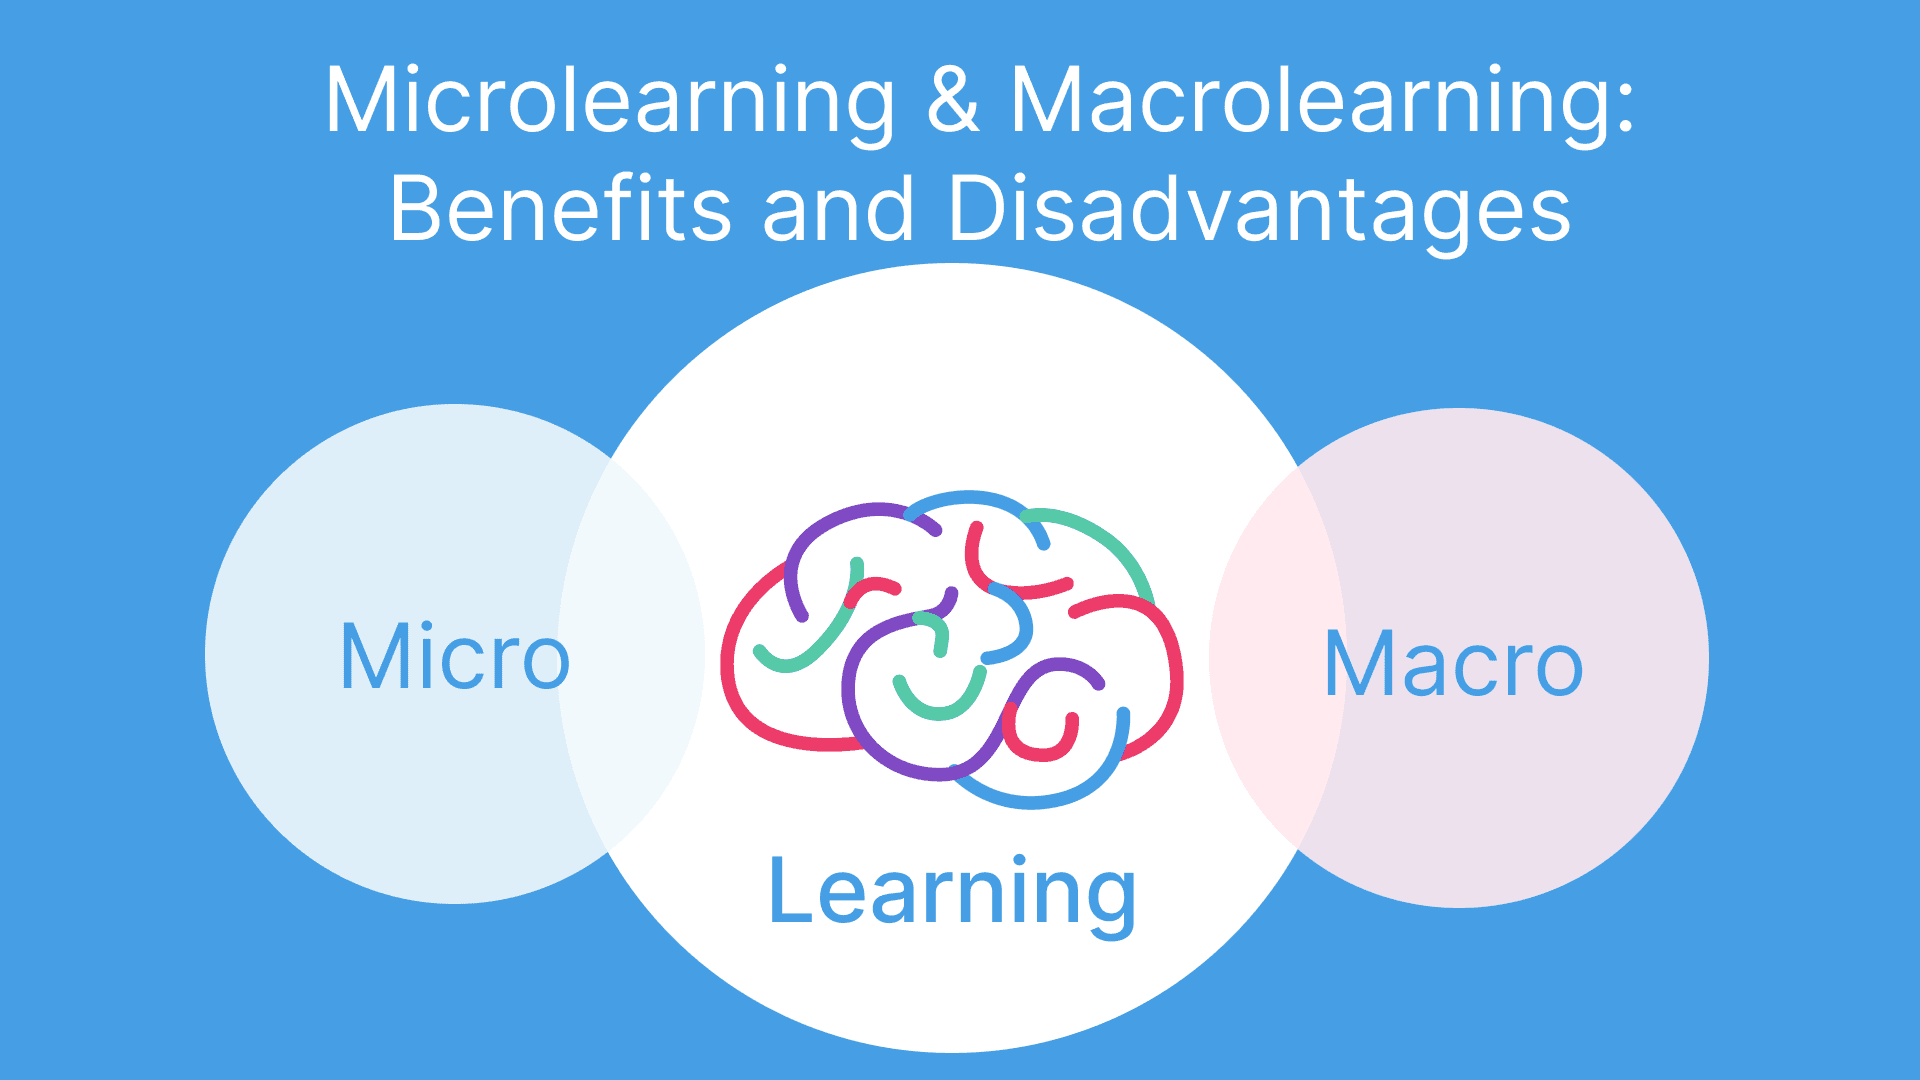 Microlearning and Macrolearning Benefits and Disadvantages perculus.png